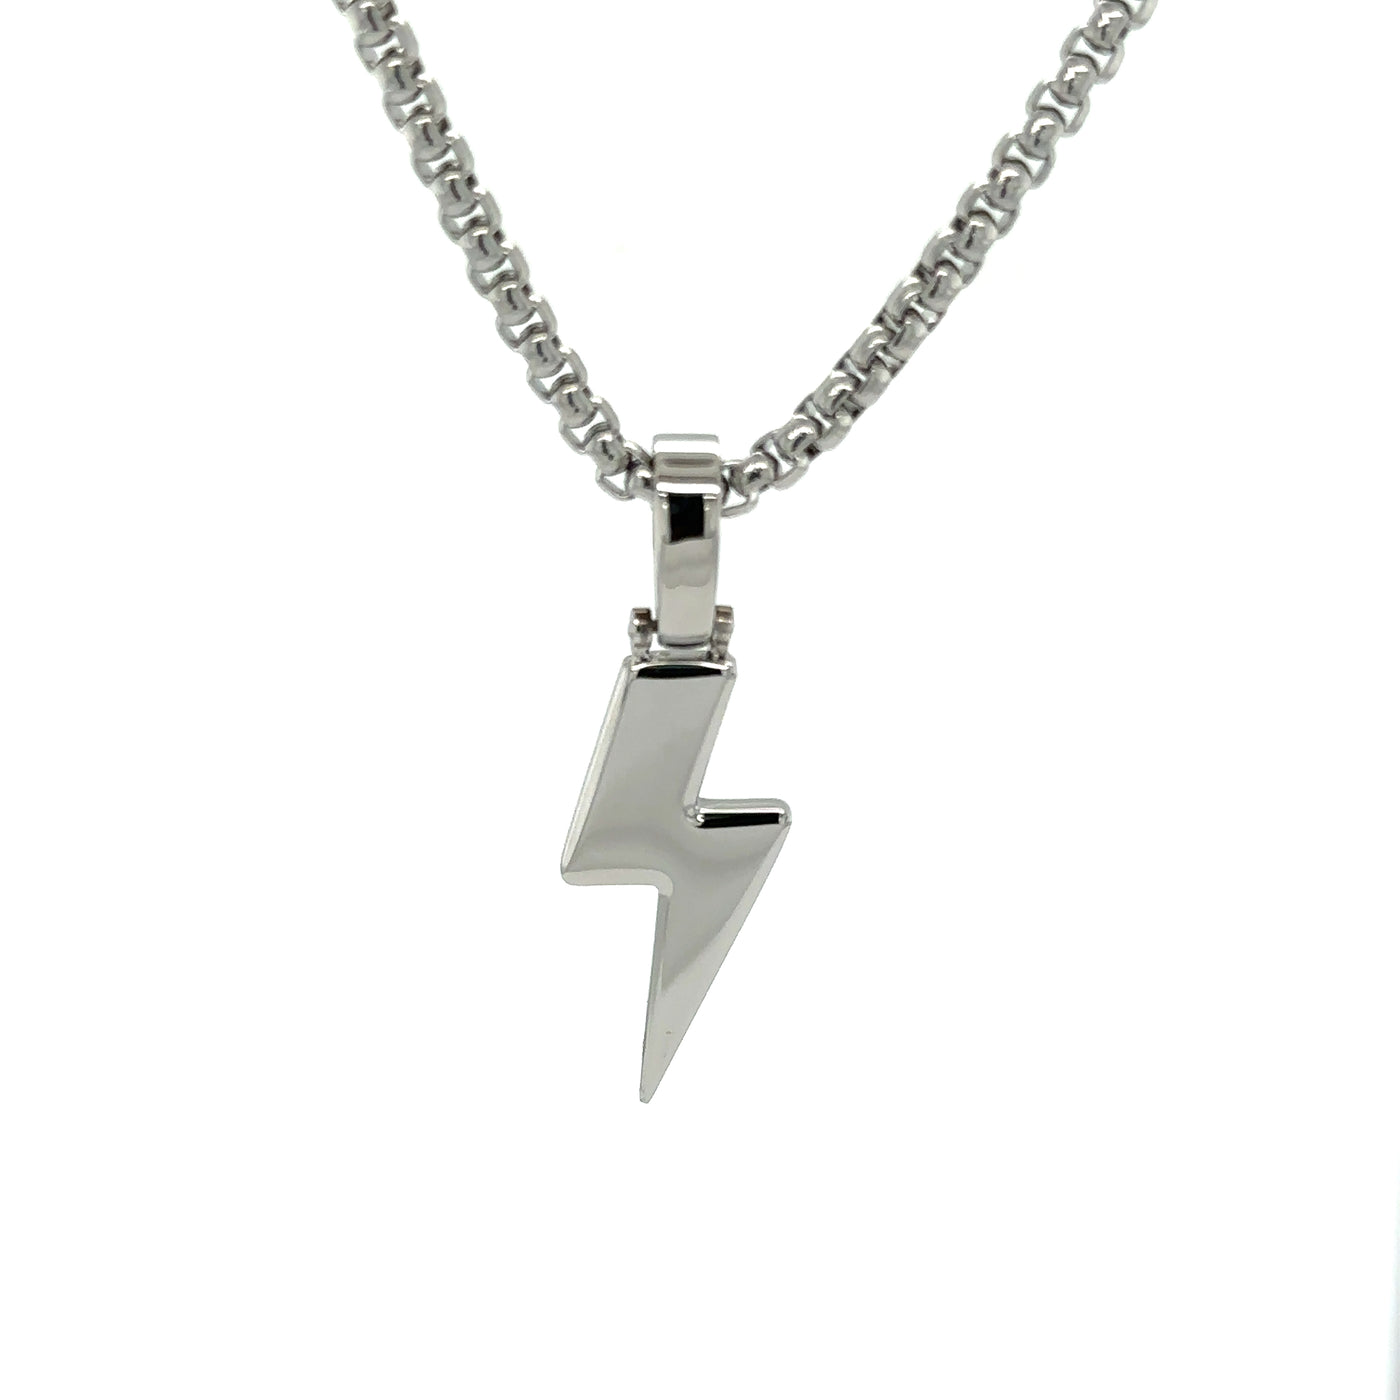 Dainty Lightning Bolt Necklace with an 18